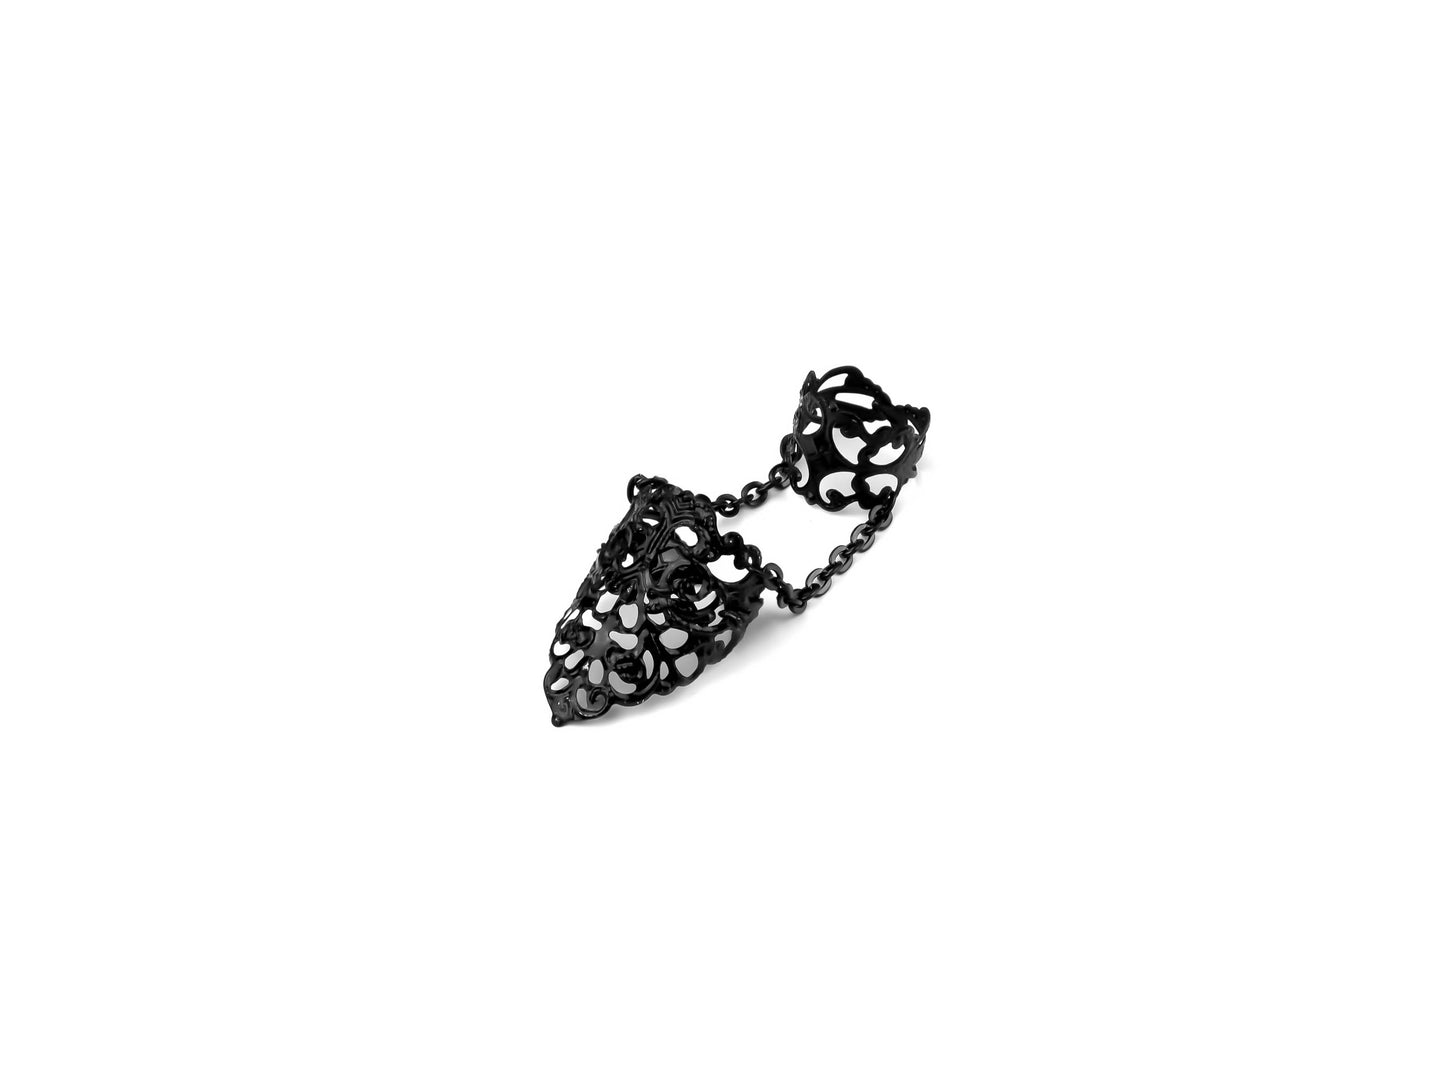 A captivating Myril Jewels gothic black double ring, intertwining elegance with dark neo-goth motifs, perfect for trendsetters of the alternative scene. This piece embodies the essence of witchcore and whimsigoth, ideal for Halloween, as a standout rave accessory or a bold everyday statement. It's a unique gift to delight any goth girlfriend or friend who revels in punk-inspired, handcrafted jewelry.